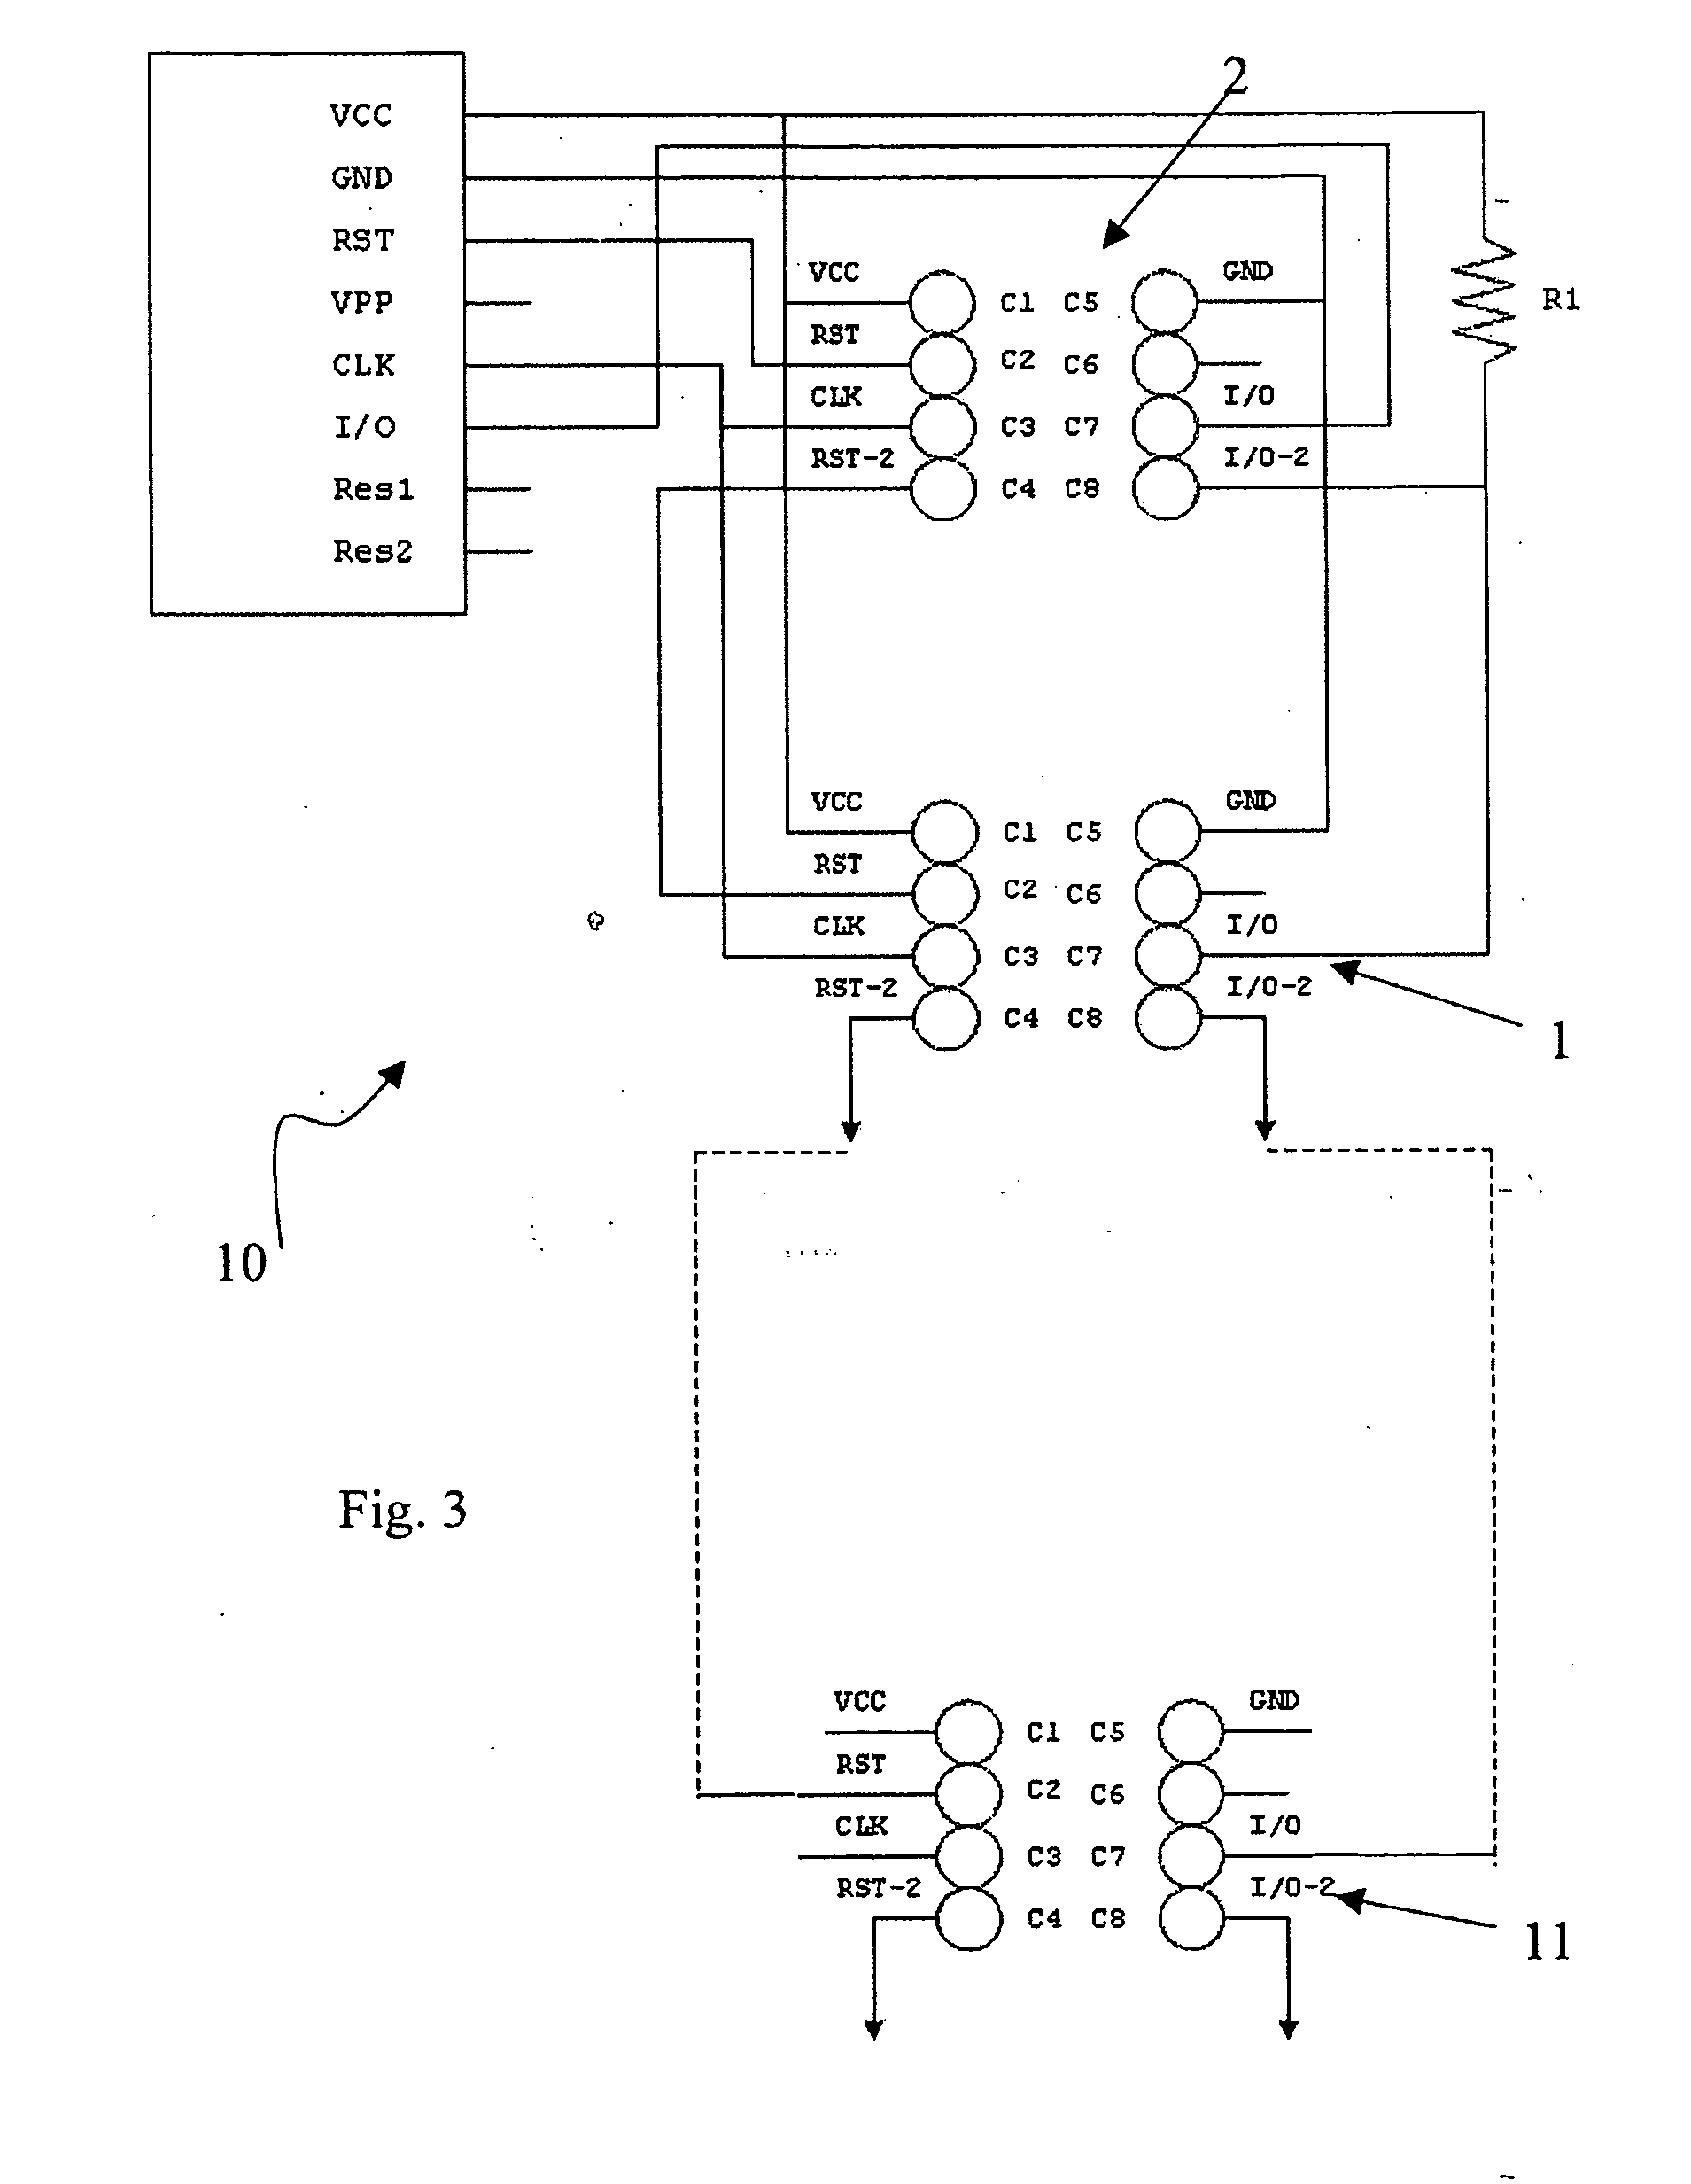 Apparatus and method for initializing an IC card